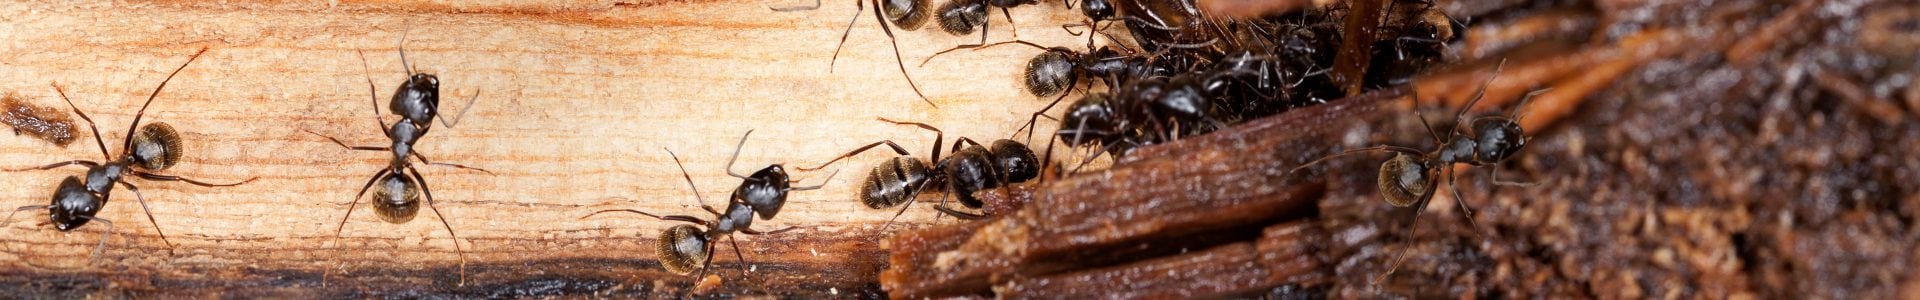 What Attracts Termites?